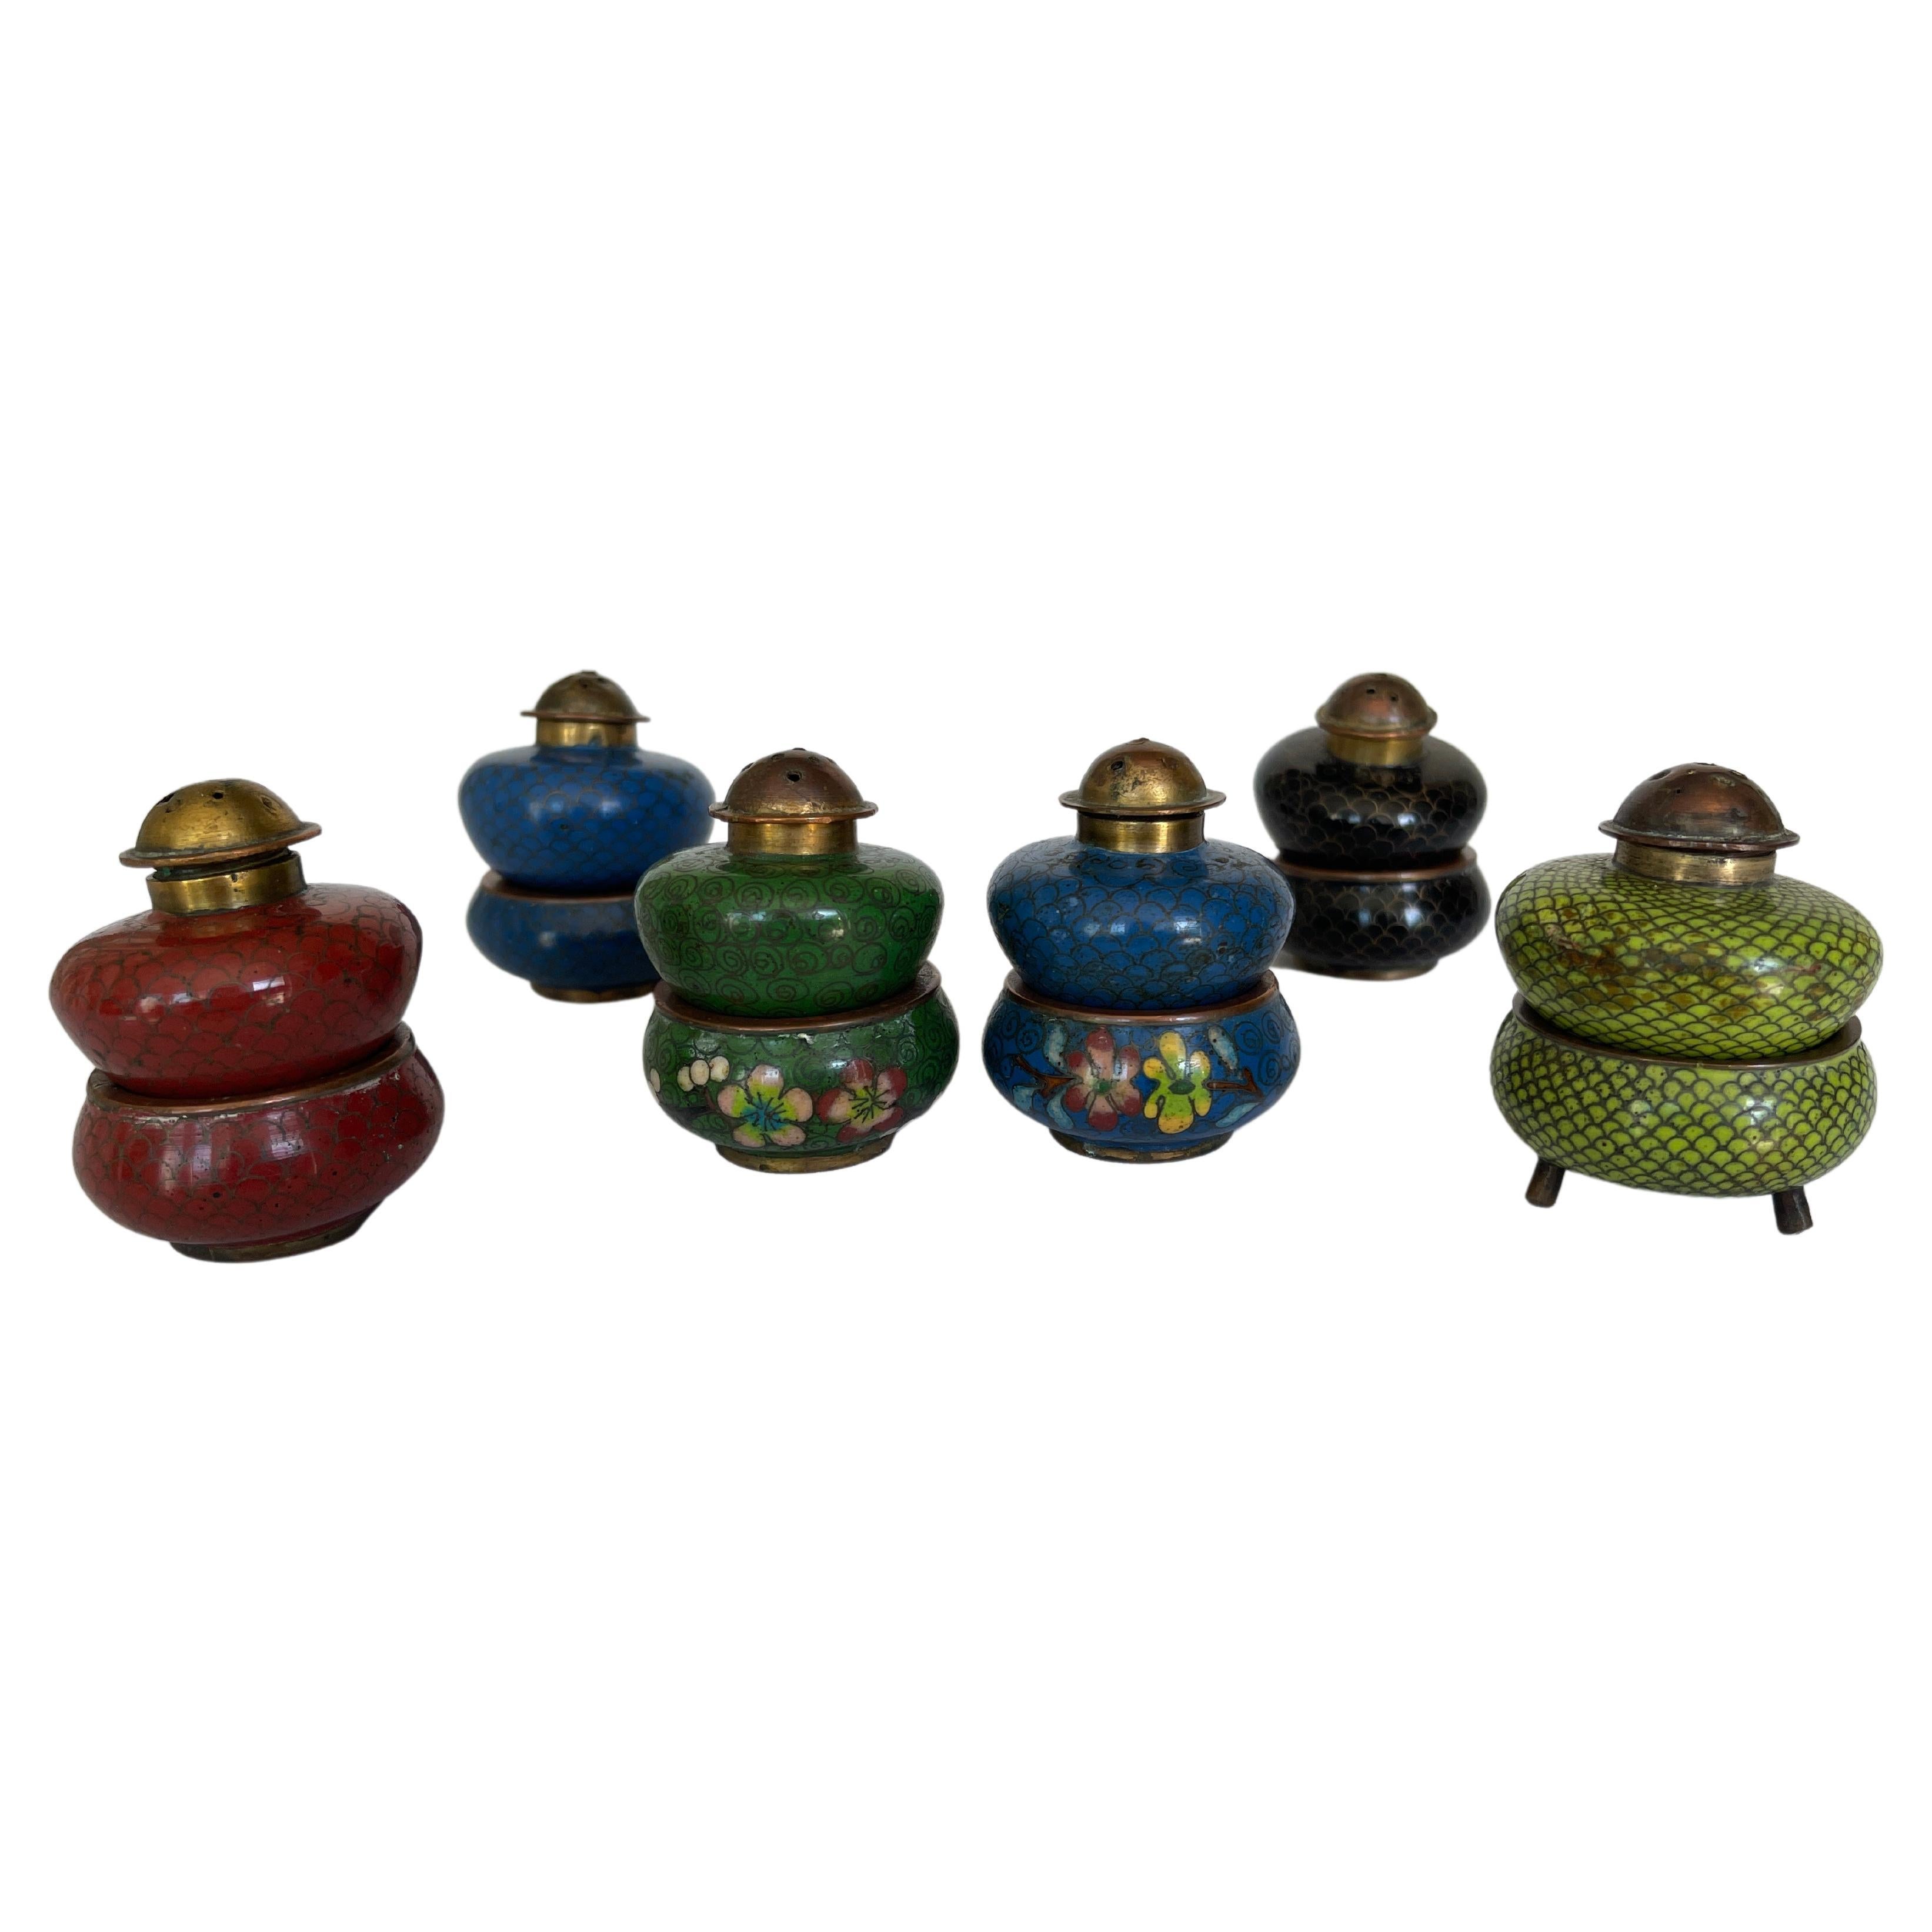 Antique Chinese enamel on copper cloisonné salts and pepper shaker sets.
There are 12 pieces in total. 6 salt cellars, and 6 matching pepper shakers.
Colors include blue, dark green, red, black , and light green. 
The light green salt has brass